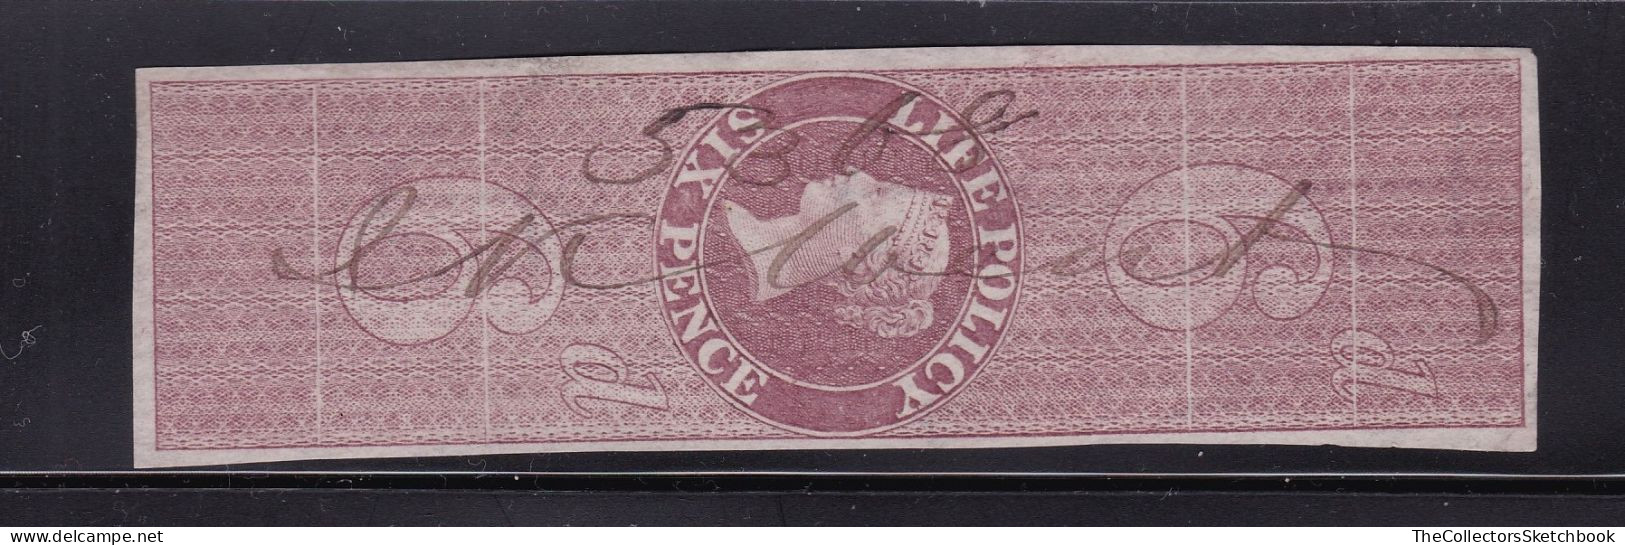 GB Fiscals / Revenues Life Policy 6d -  Red - Brown Barefoot 28. Watermark Simple  Anchor Good Used - Revenue Stamps